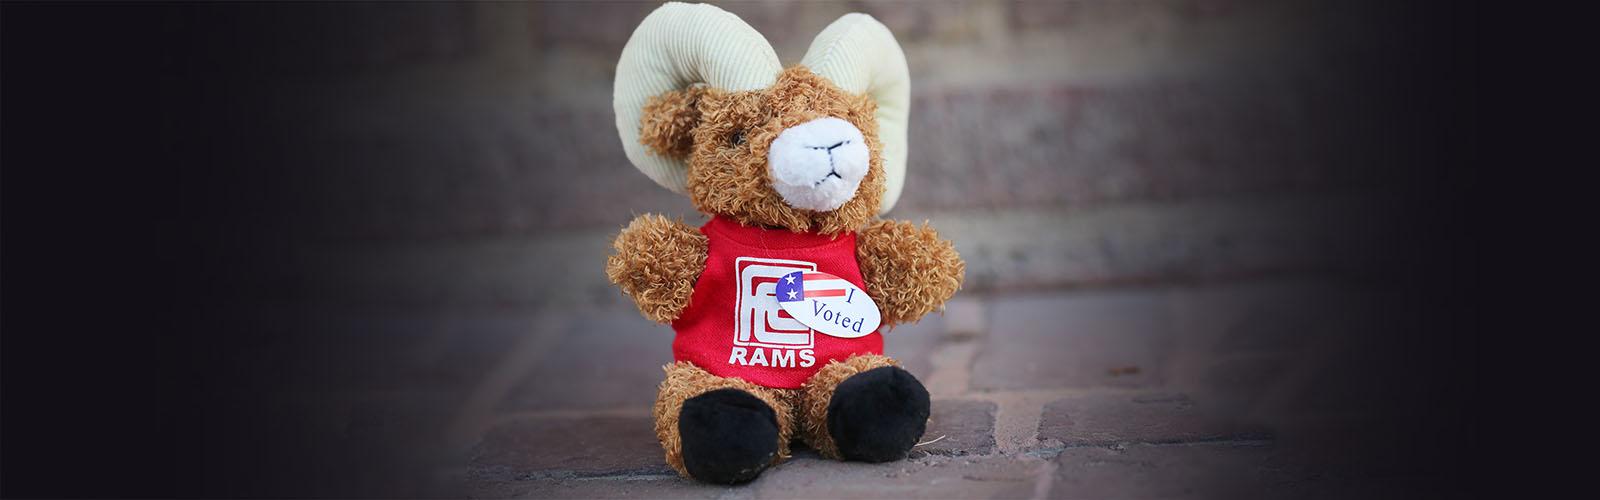 toy ram voted